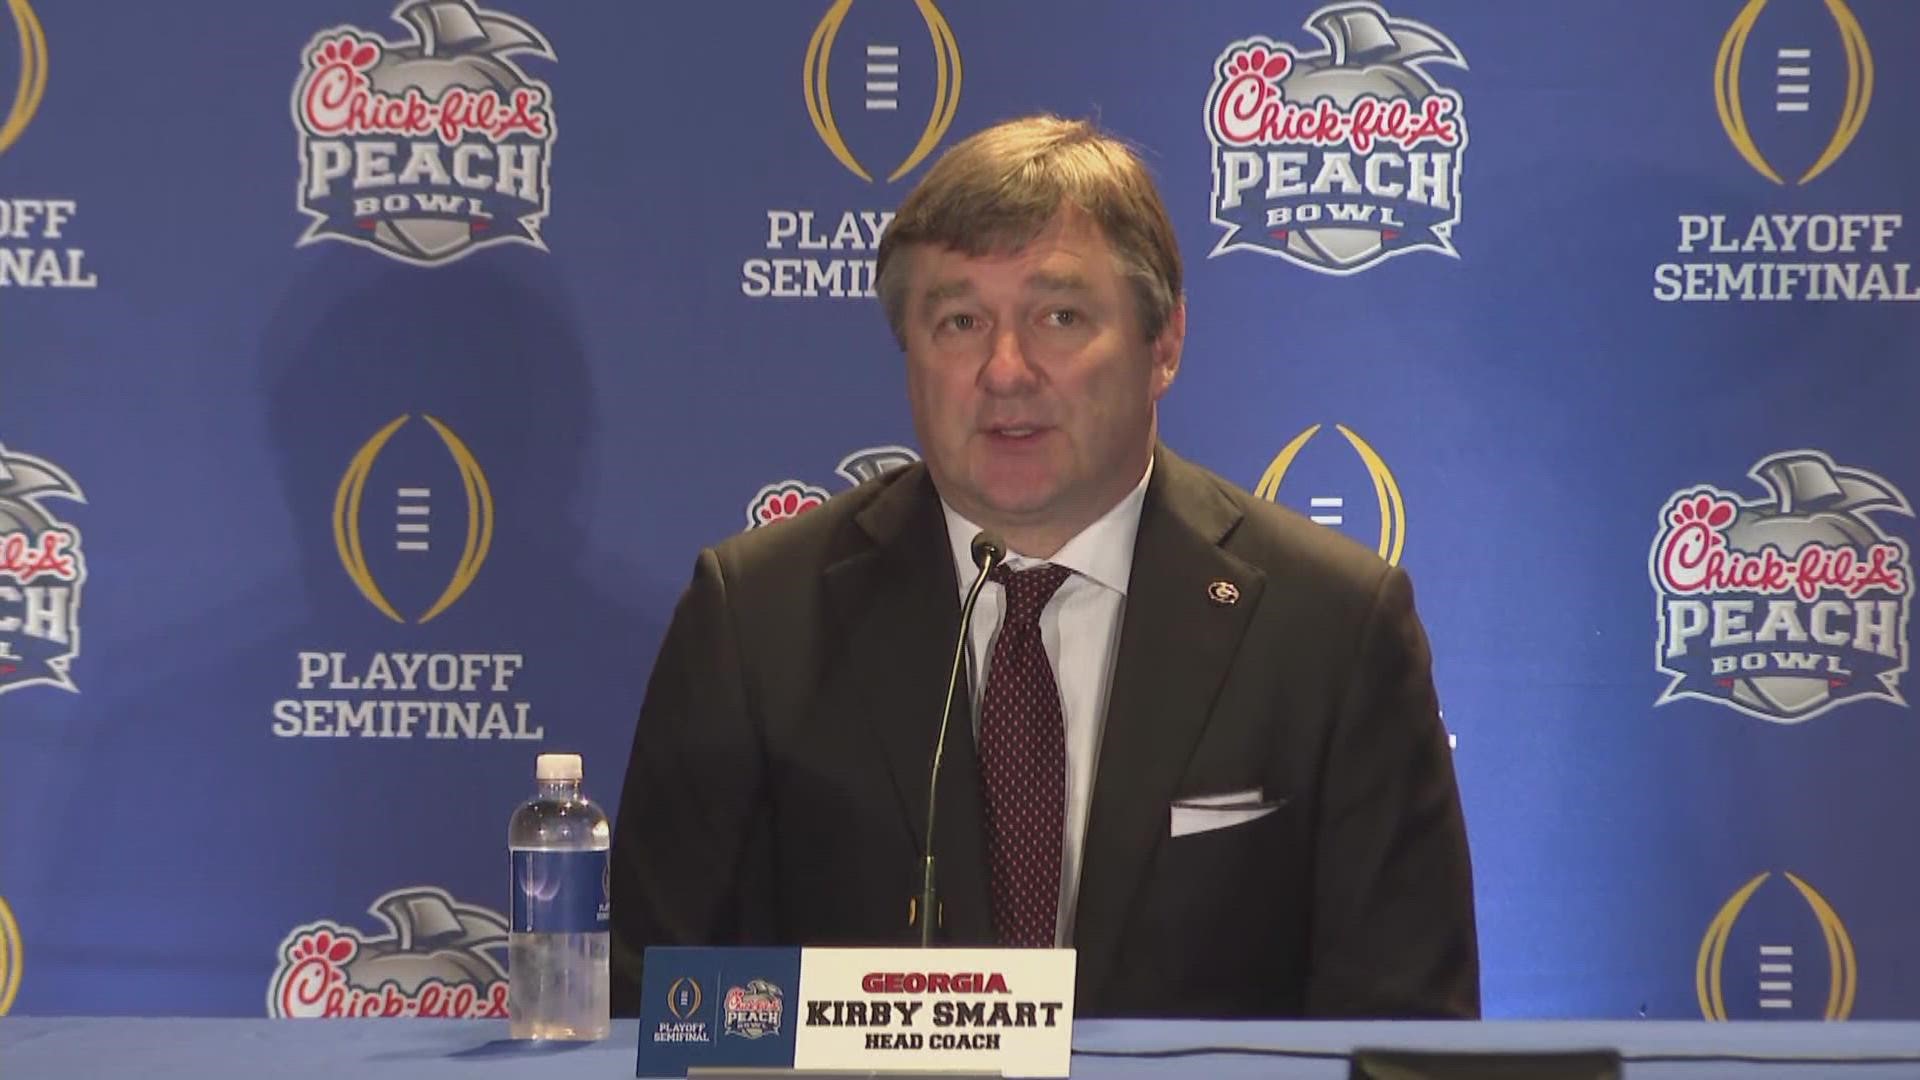 UGA coach Kirby Smart conducted a joint press conference on Friday with Ohio State's coach.